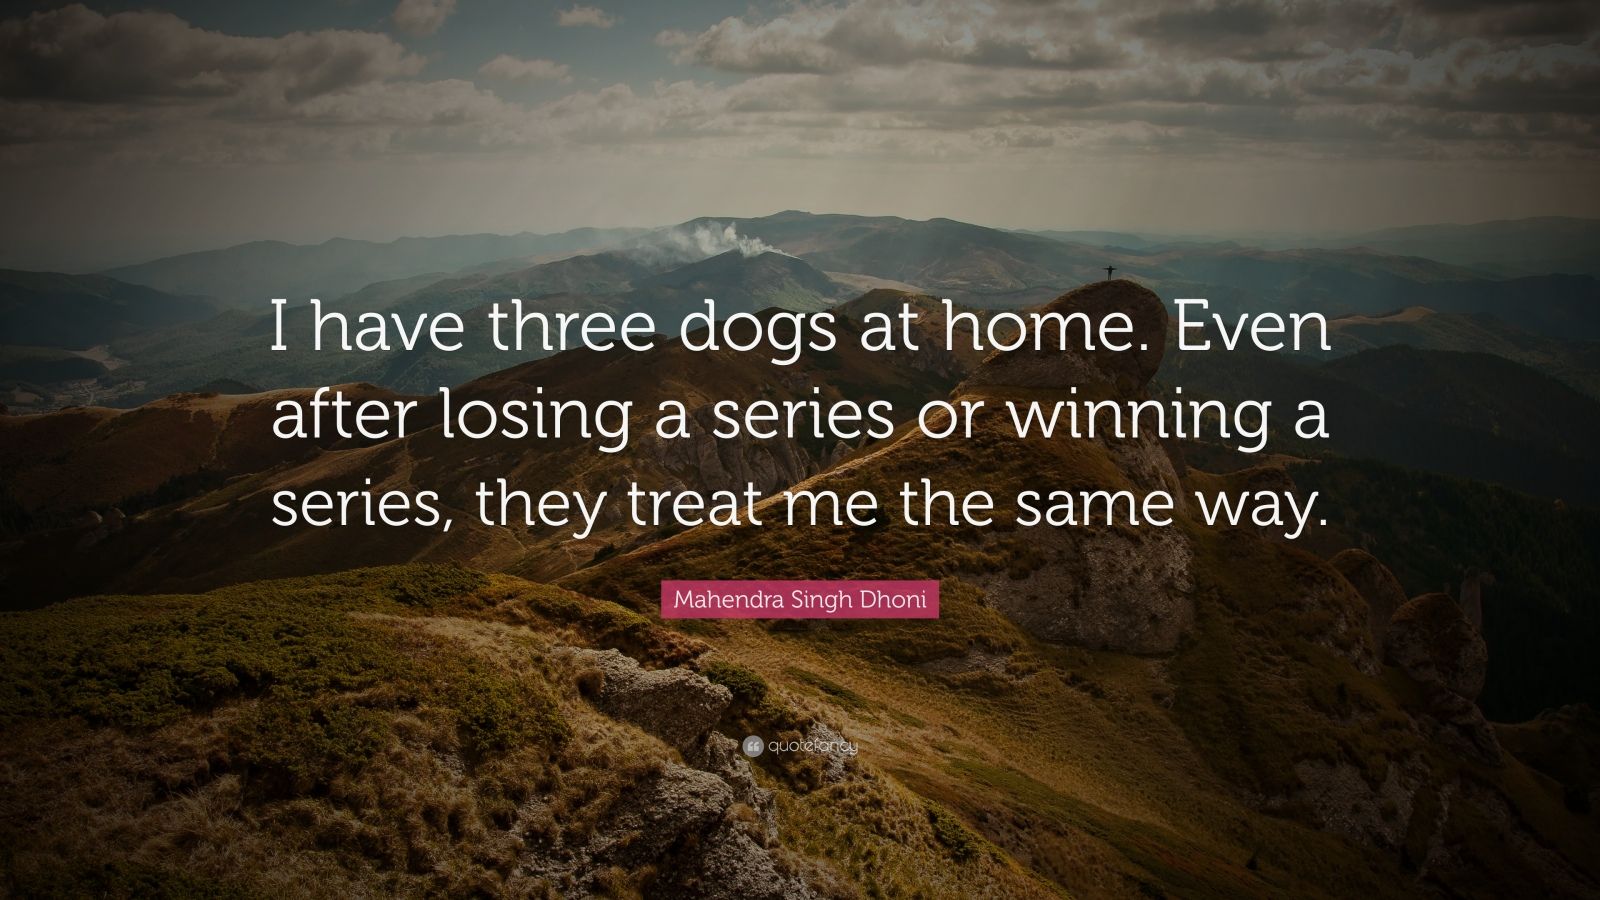 Mahendra Singh Dhoni Quote: “I have three dogs at home. Even after losing a  series or winning a series, they treat me the same way.”